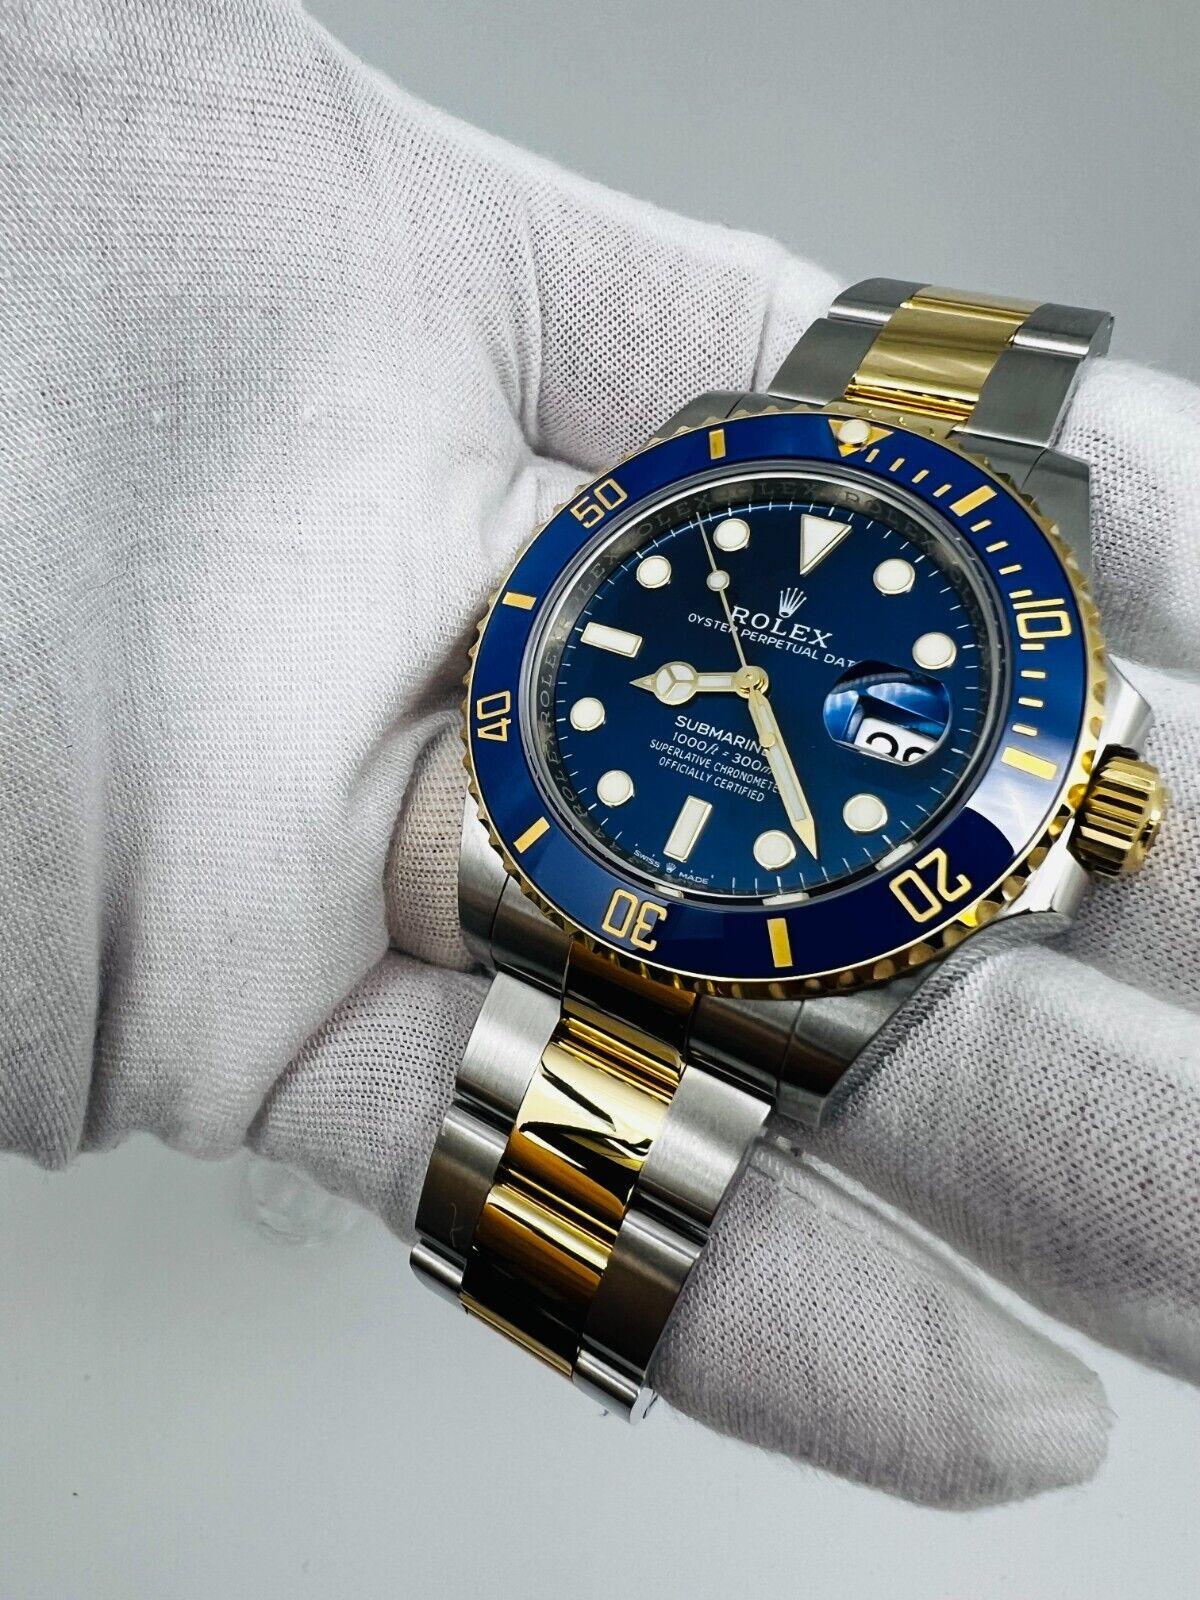 Style Number: 126613

Serial: OVC91***

Year: 2022
 
Model: Submariner
 
Case Material: Stainless Steel 
 
Band: 18K Yellow Gold & Stainless Steel 
 
Bezel: Blue Ceramic 
 
Dial: Blue Dial 
 
Face: Sapphire Crystal 
 
Case Size: 41mm 
 
Includes: